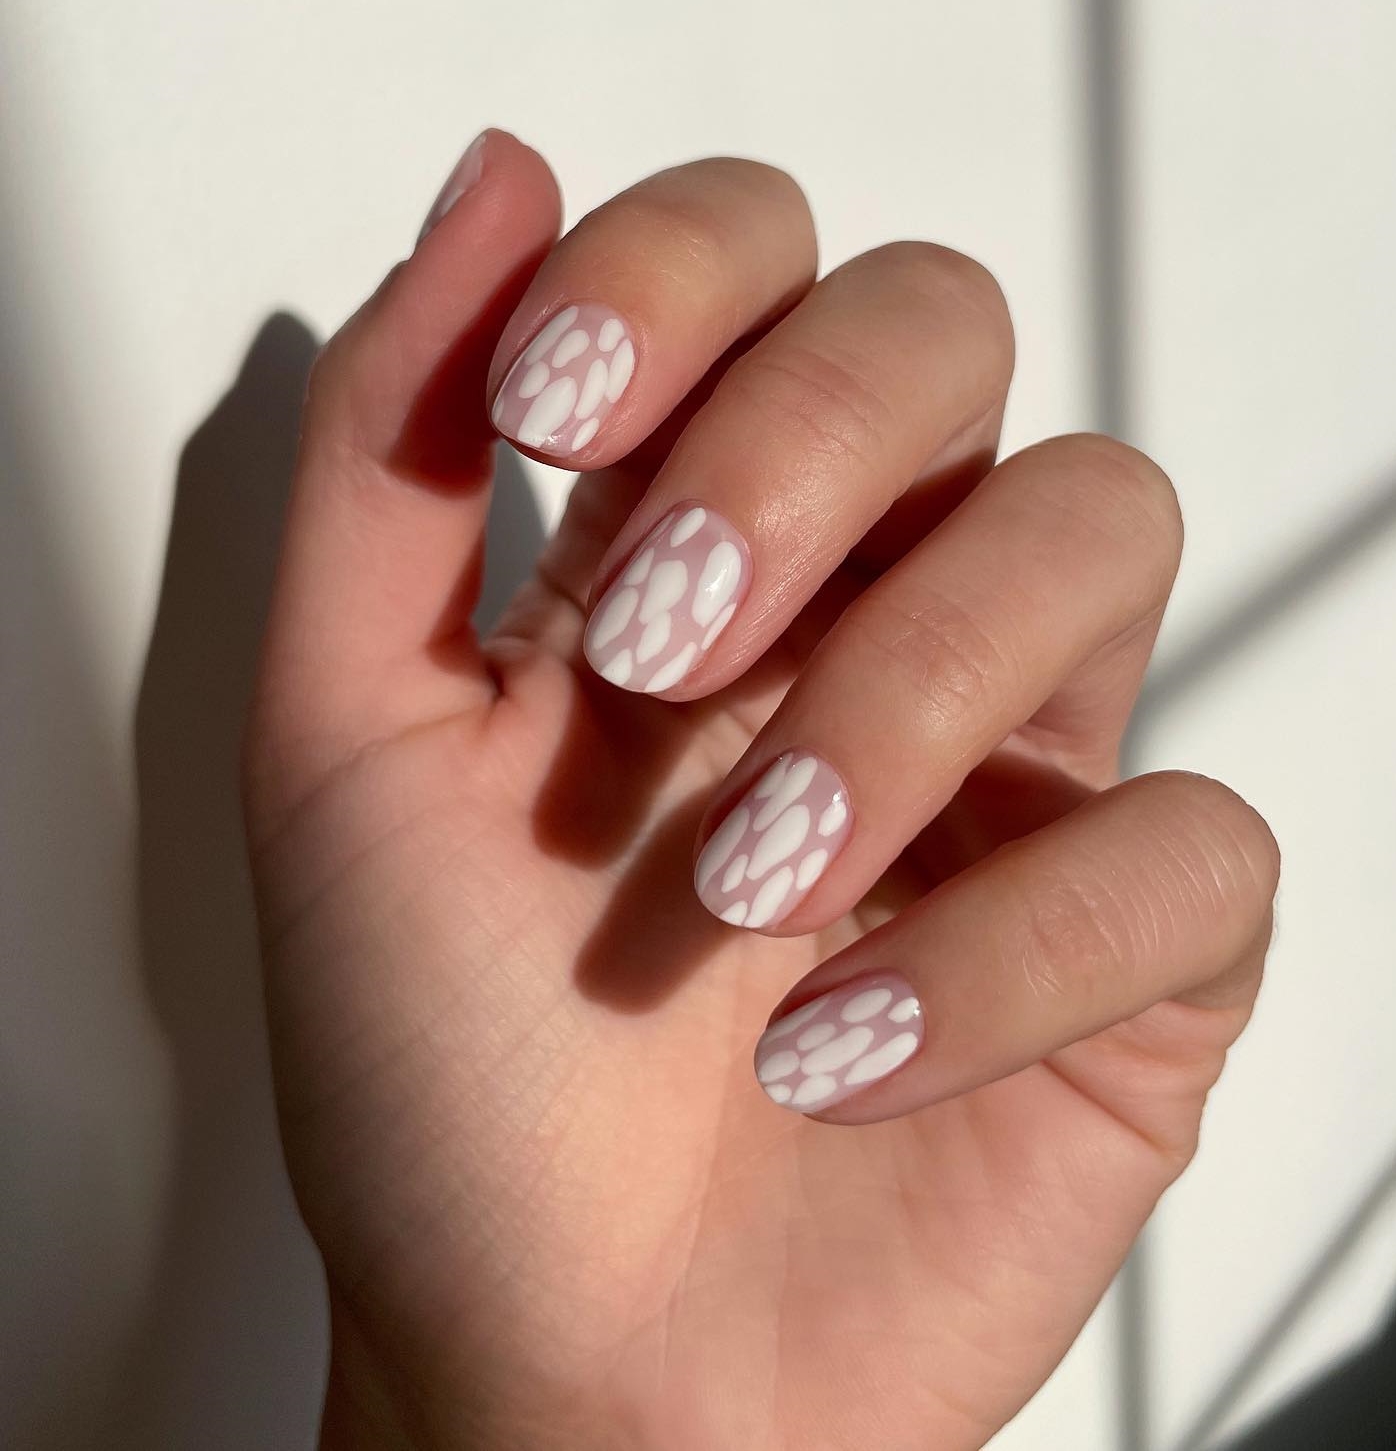 Short Nude Nails with White Spots